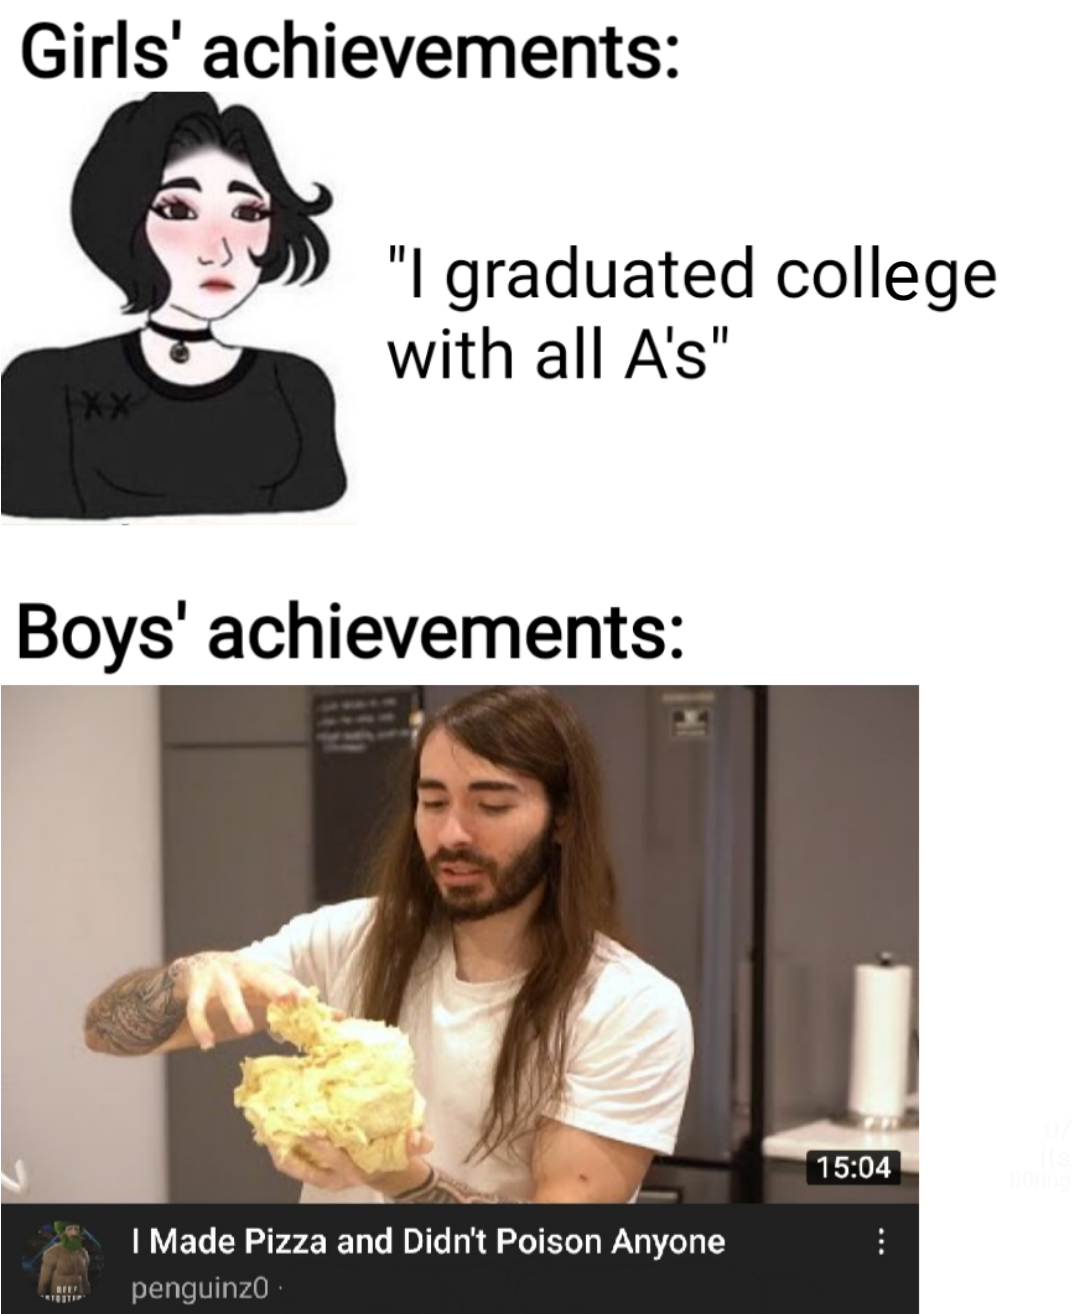 dank memes - funny memes - media - Girls' achievements "I graduated college with all A's" Boys' achievements 44 I Made Pizza and Didn't Poison Anyone penguinzo